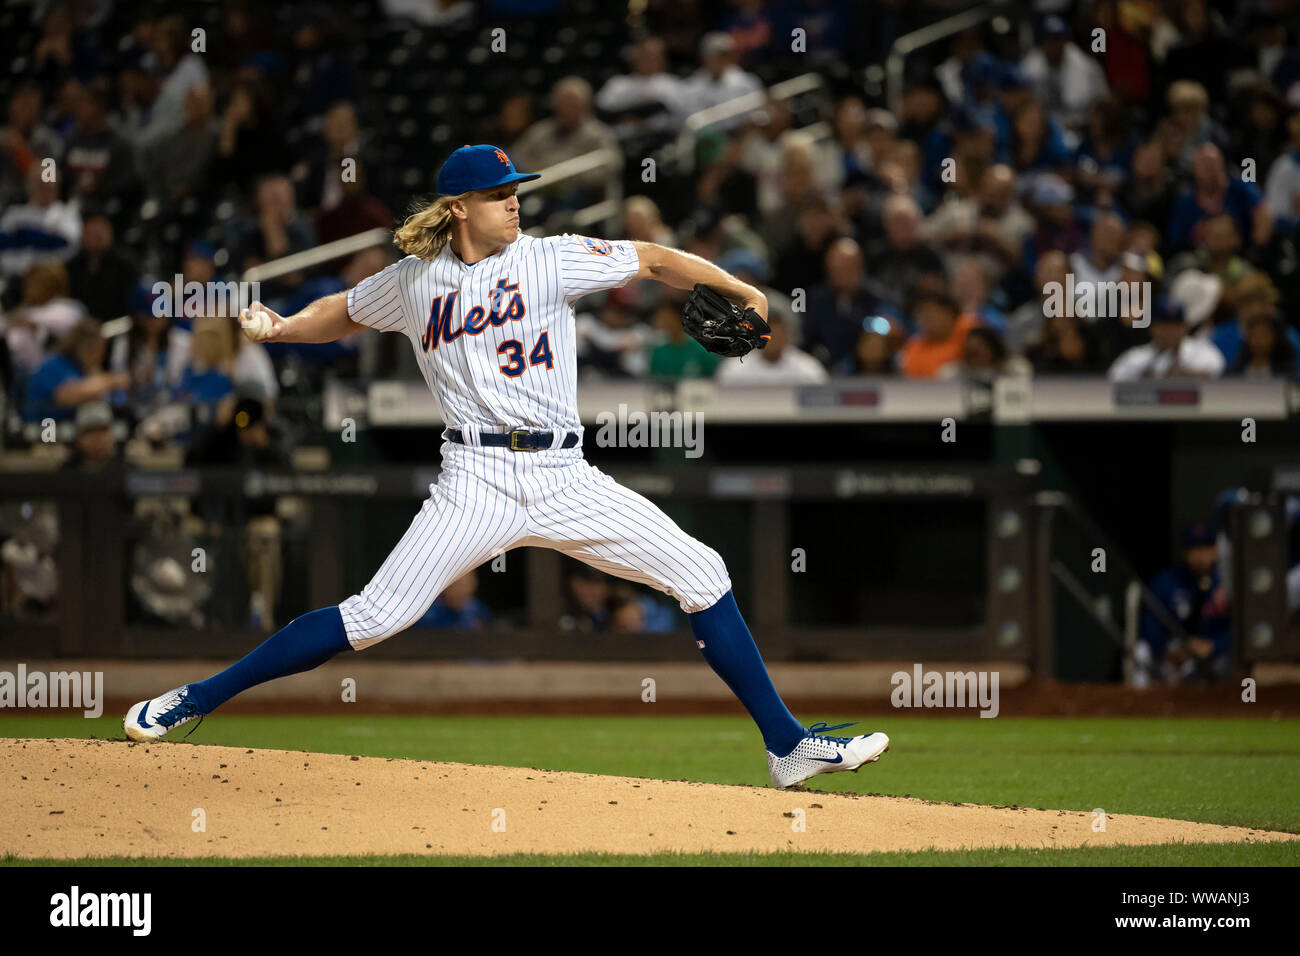 Queens, New York, USA. 13th Sep, 2019. New York Mets starting pitcher Noah Syndergaard (34) delivers the pitch during the game between The New York Mets and The Los Angeles Dodgers at Citi Field in Queens, New York. Mandatory credit: Kostas Lymperopoulos/CSM/Alamy Live News Stock Photo